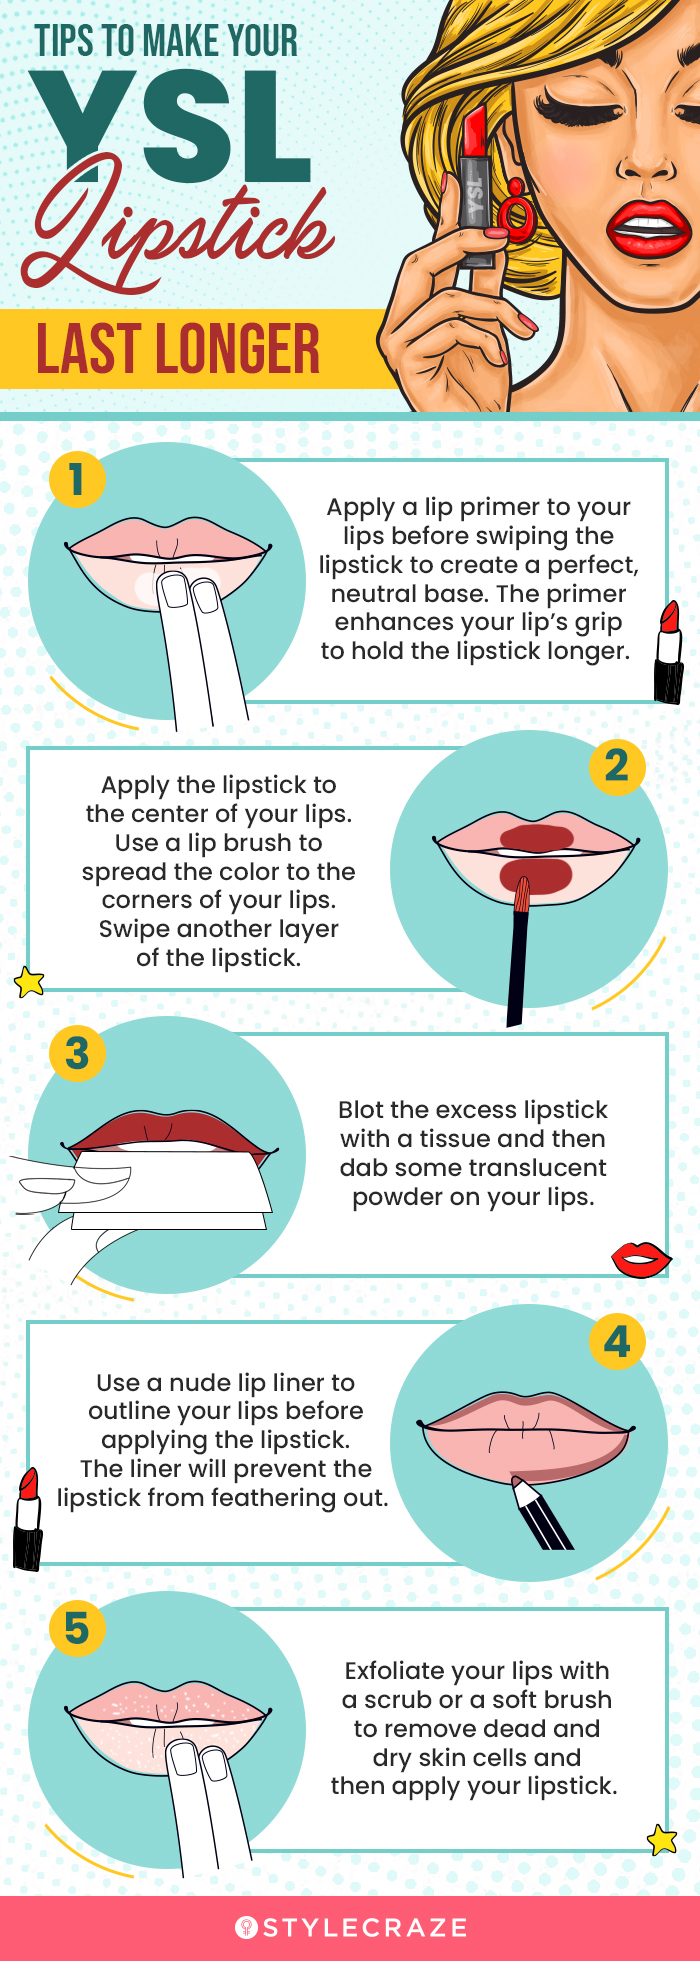 Tips to Make Your YSL Lipstick Last Longer (infographic)